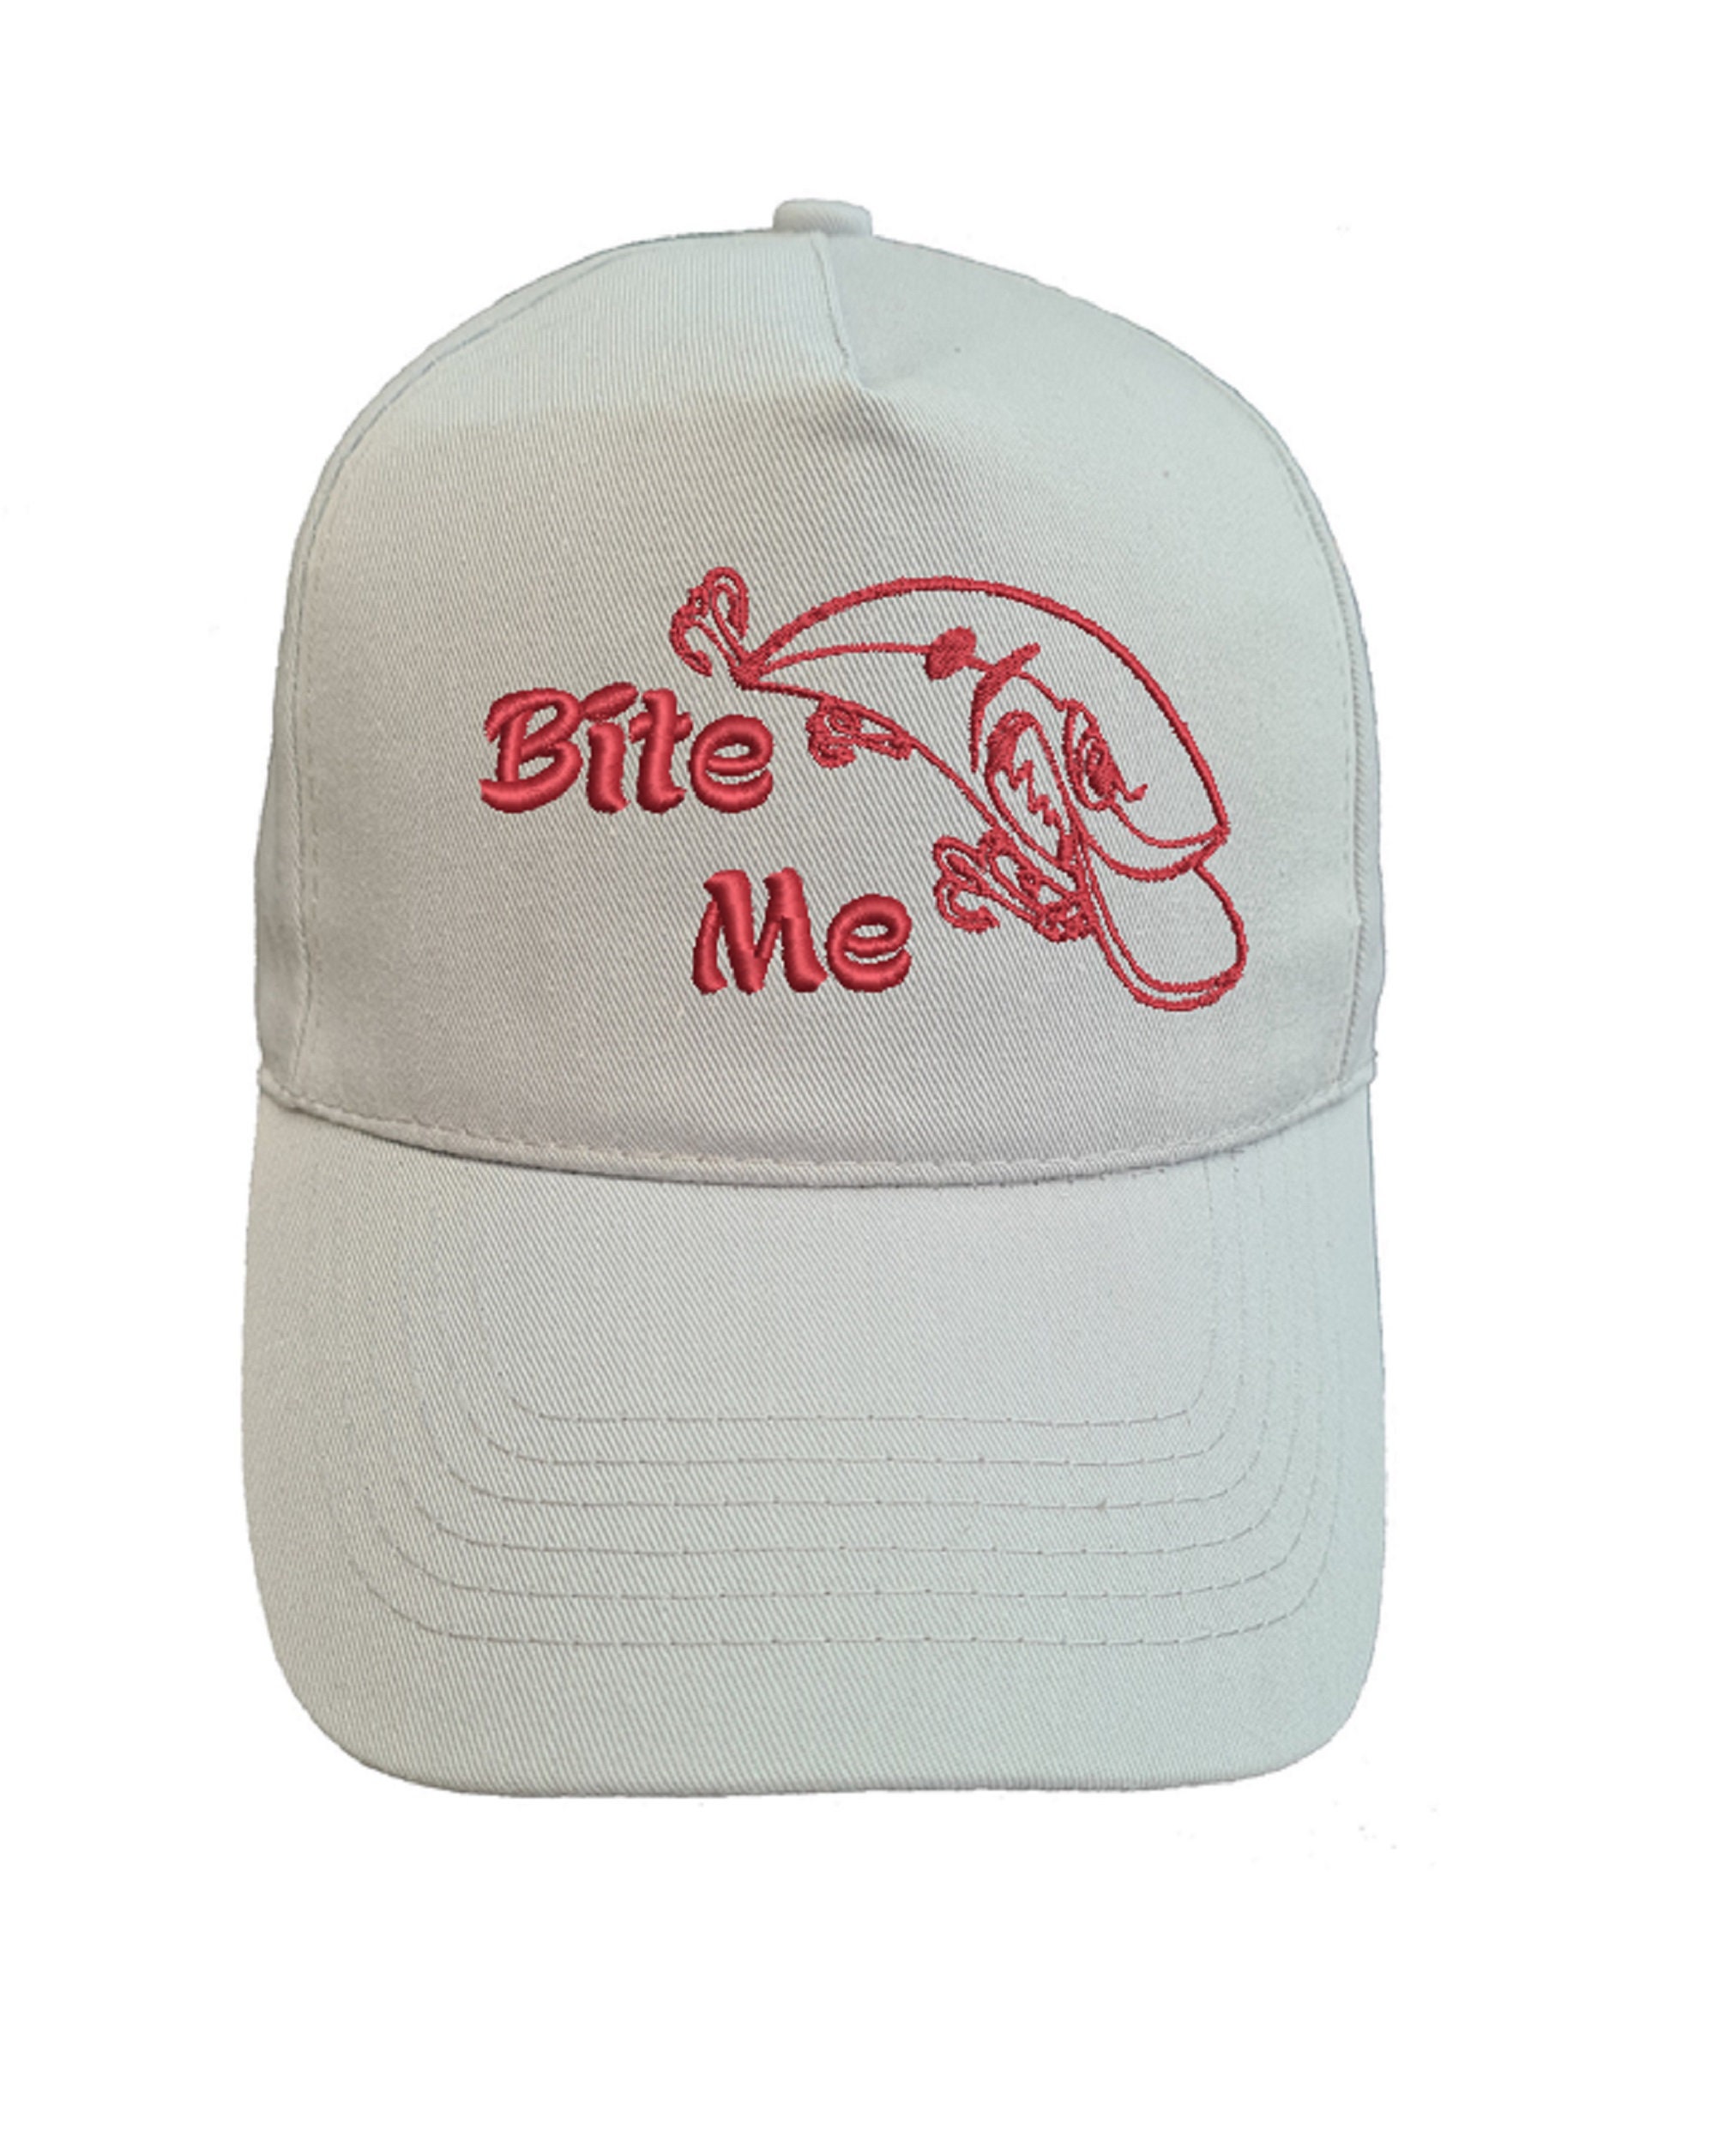 Funny Fishing Caps - Bite Me, Life Is Simple Hat Gift - 100% Cotton Embroidered Cap